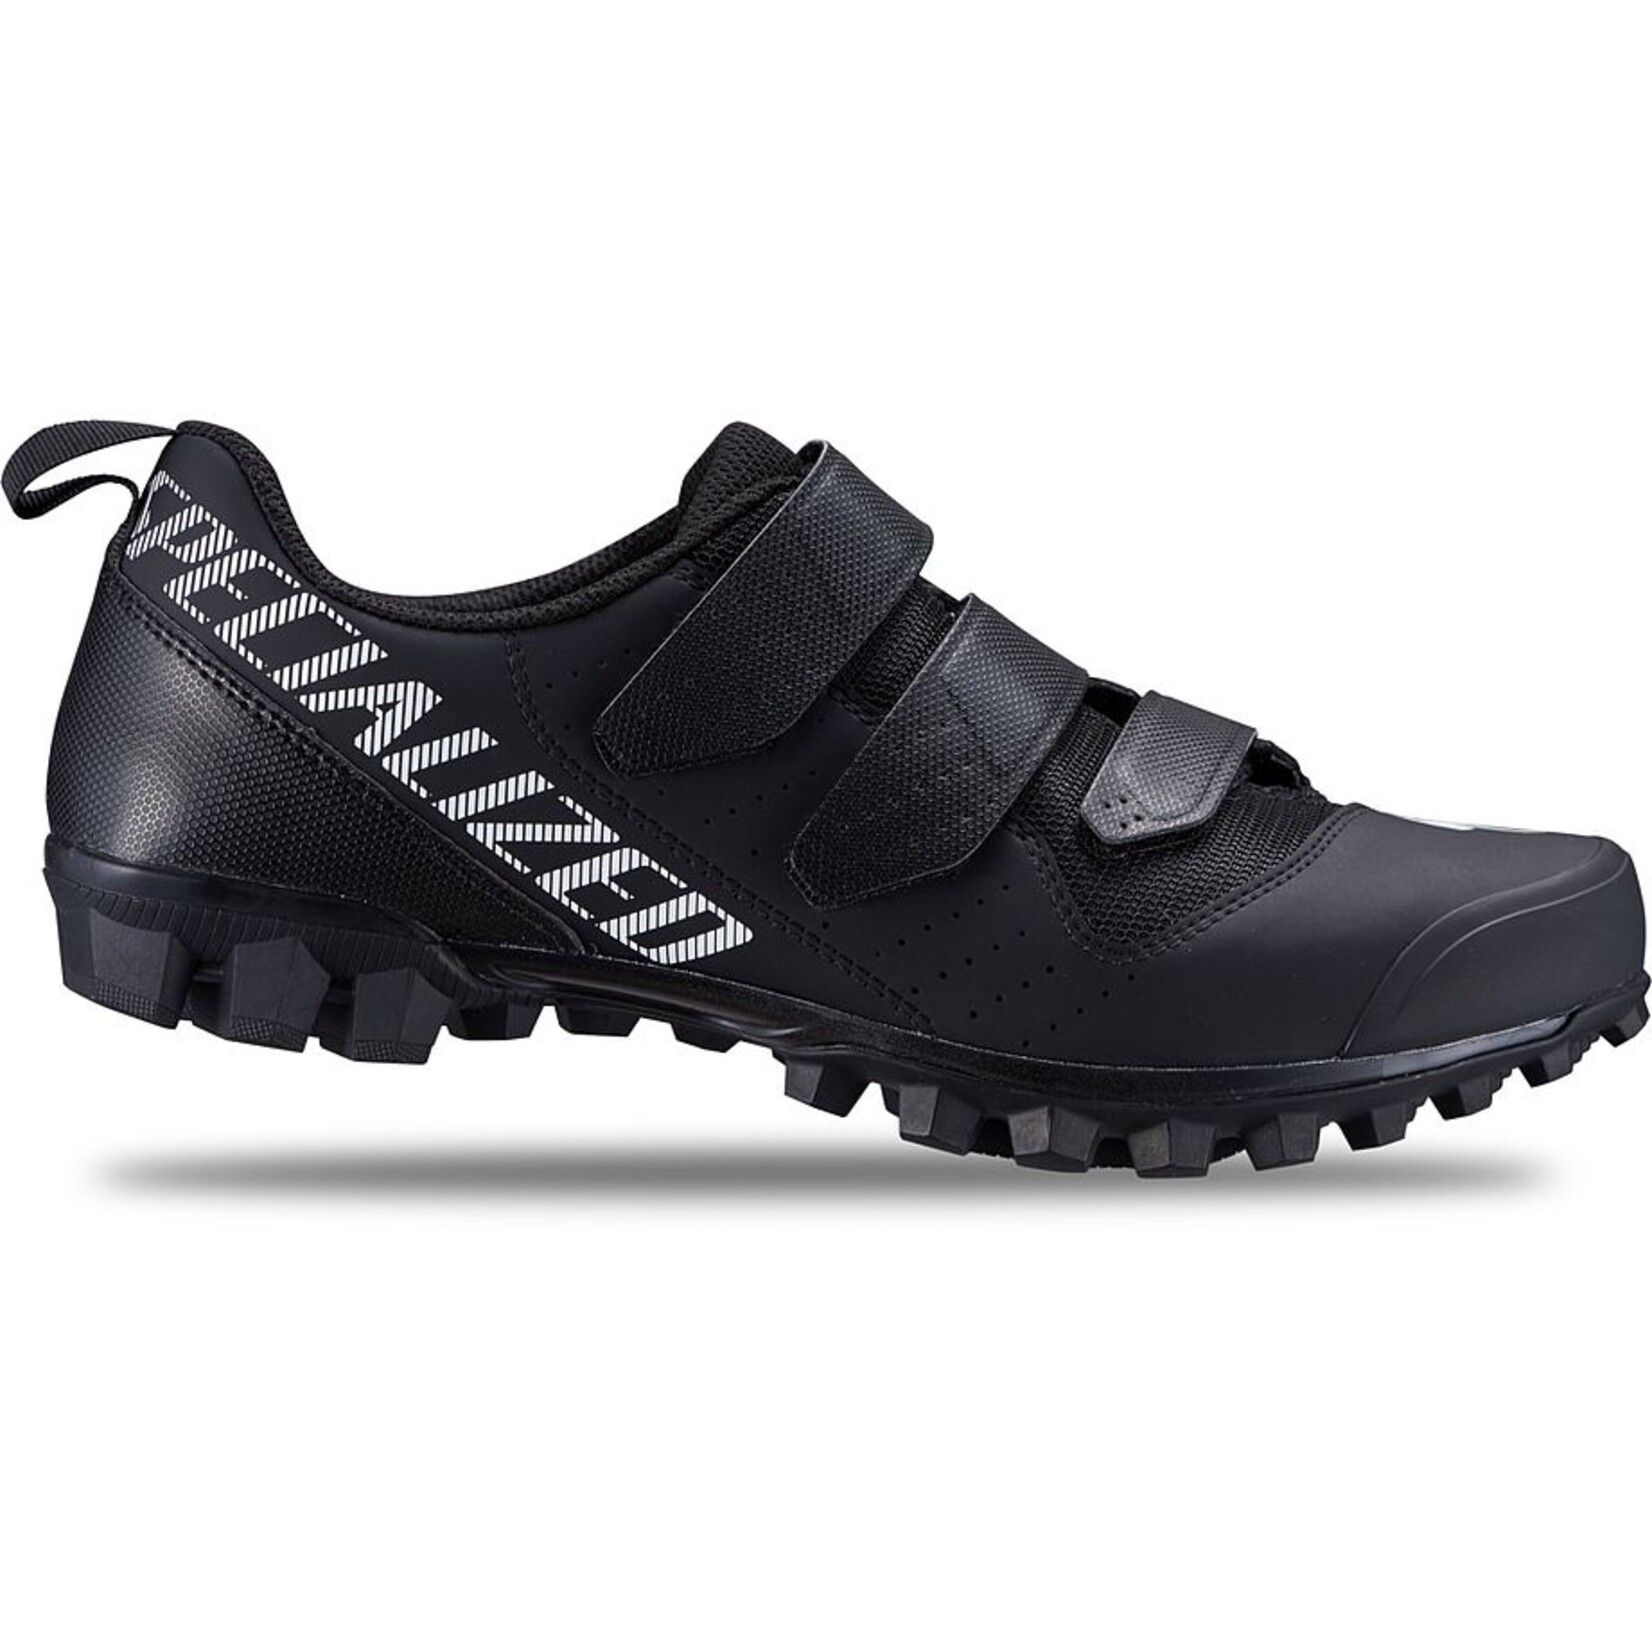 Specialized Recon 1.0 Mountain Bike Shoes in Black